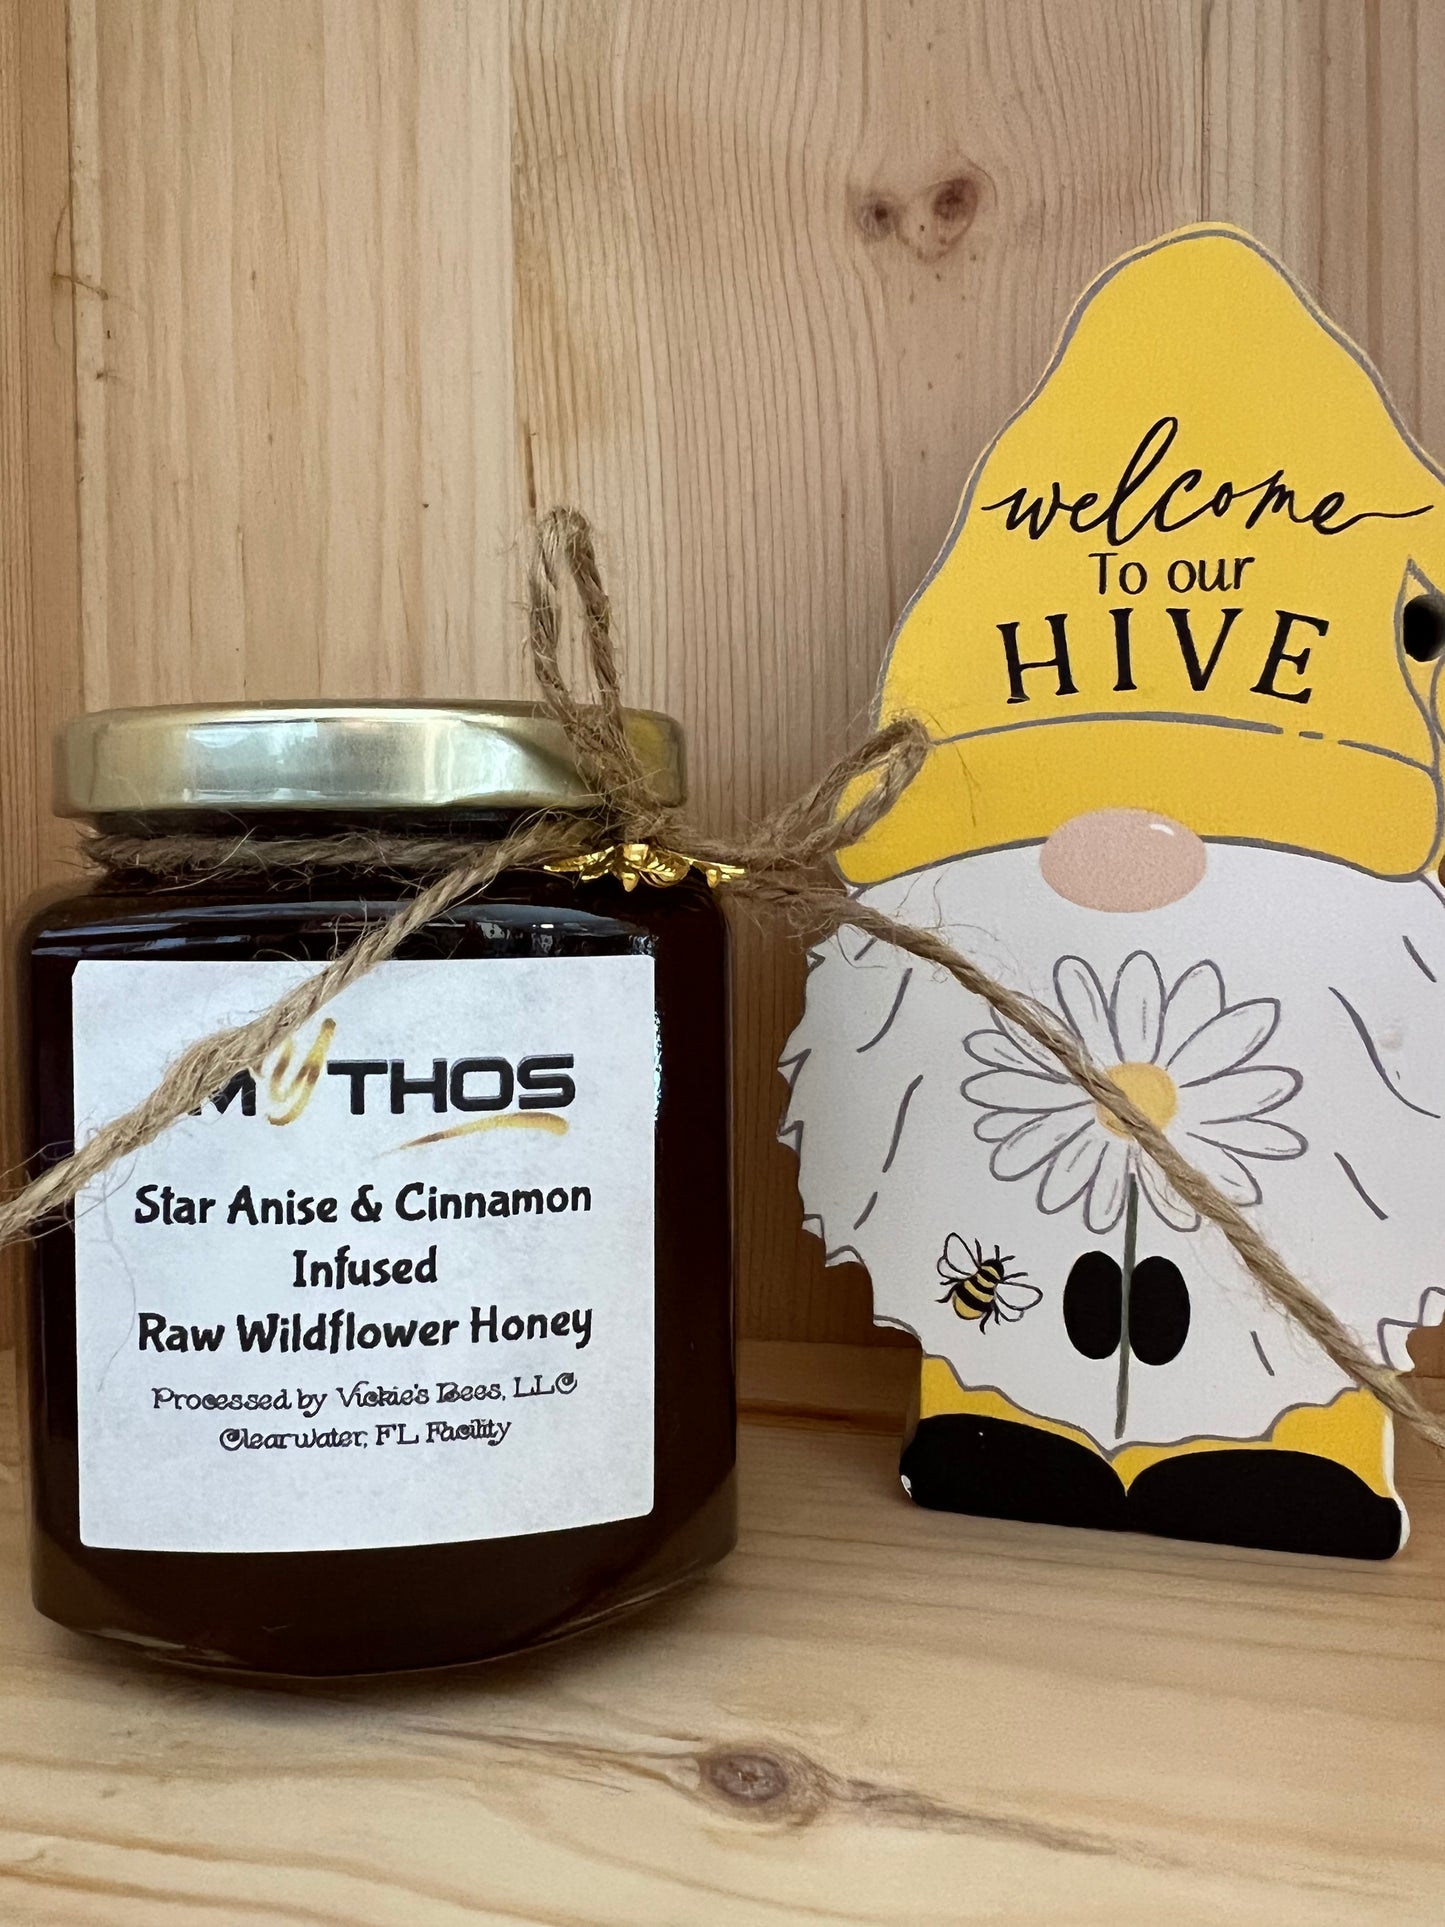 Star Anise and Cinnamon Infused Natural Honey